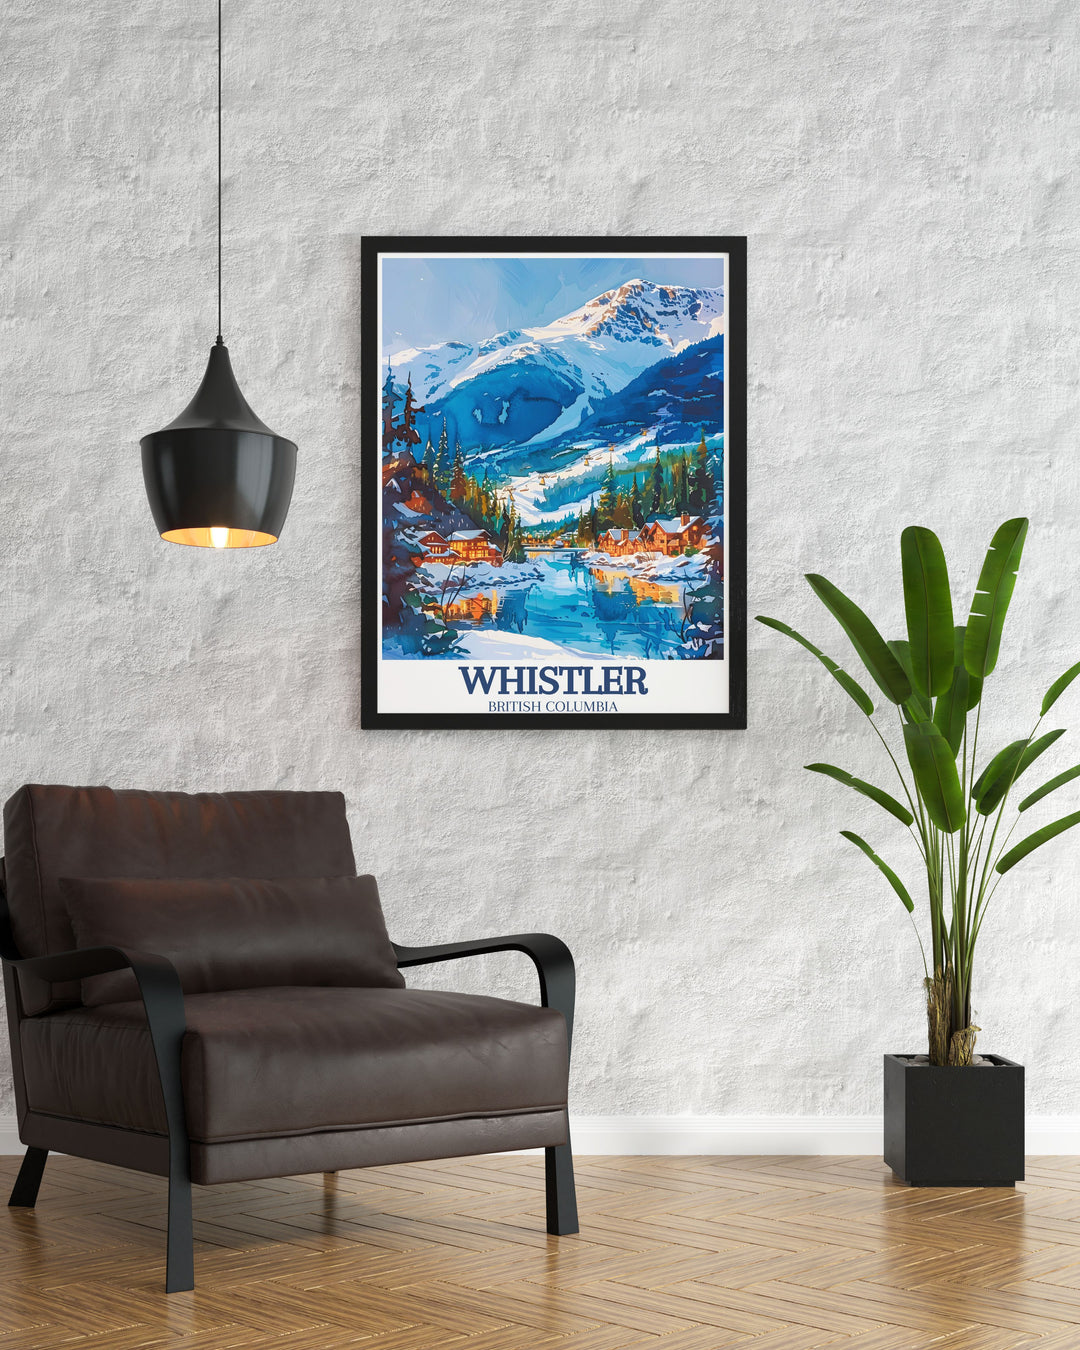 Whistler wall art depicting the thrill of skiing and the tranquility of the Coast Mountains making it a beautiful addition to your living space evoking memories of snowy adventures